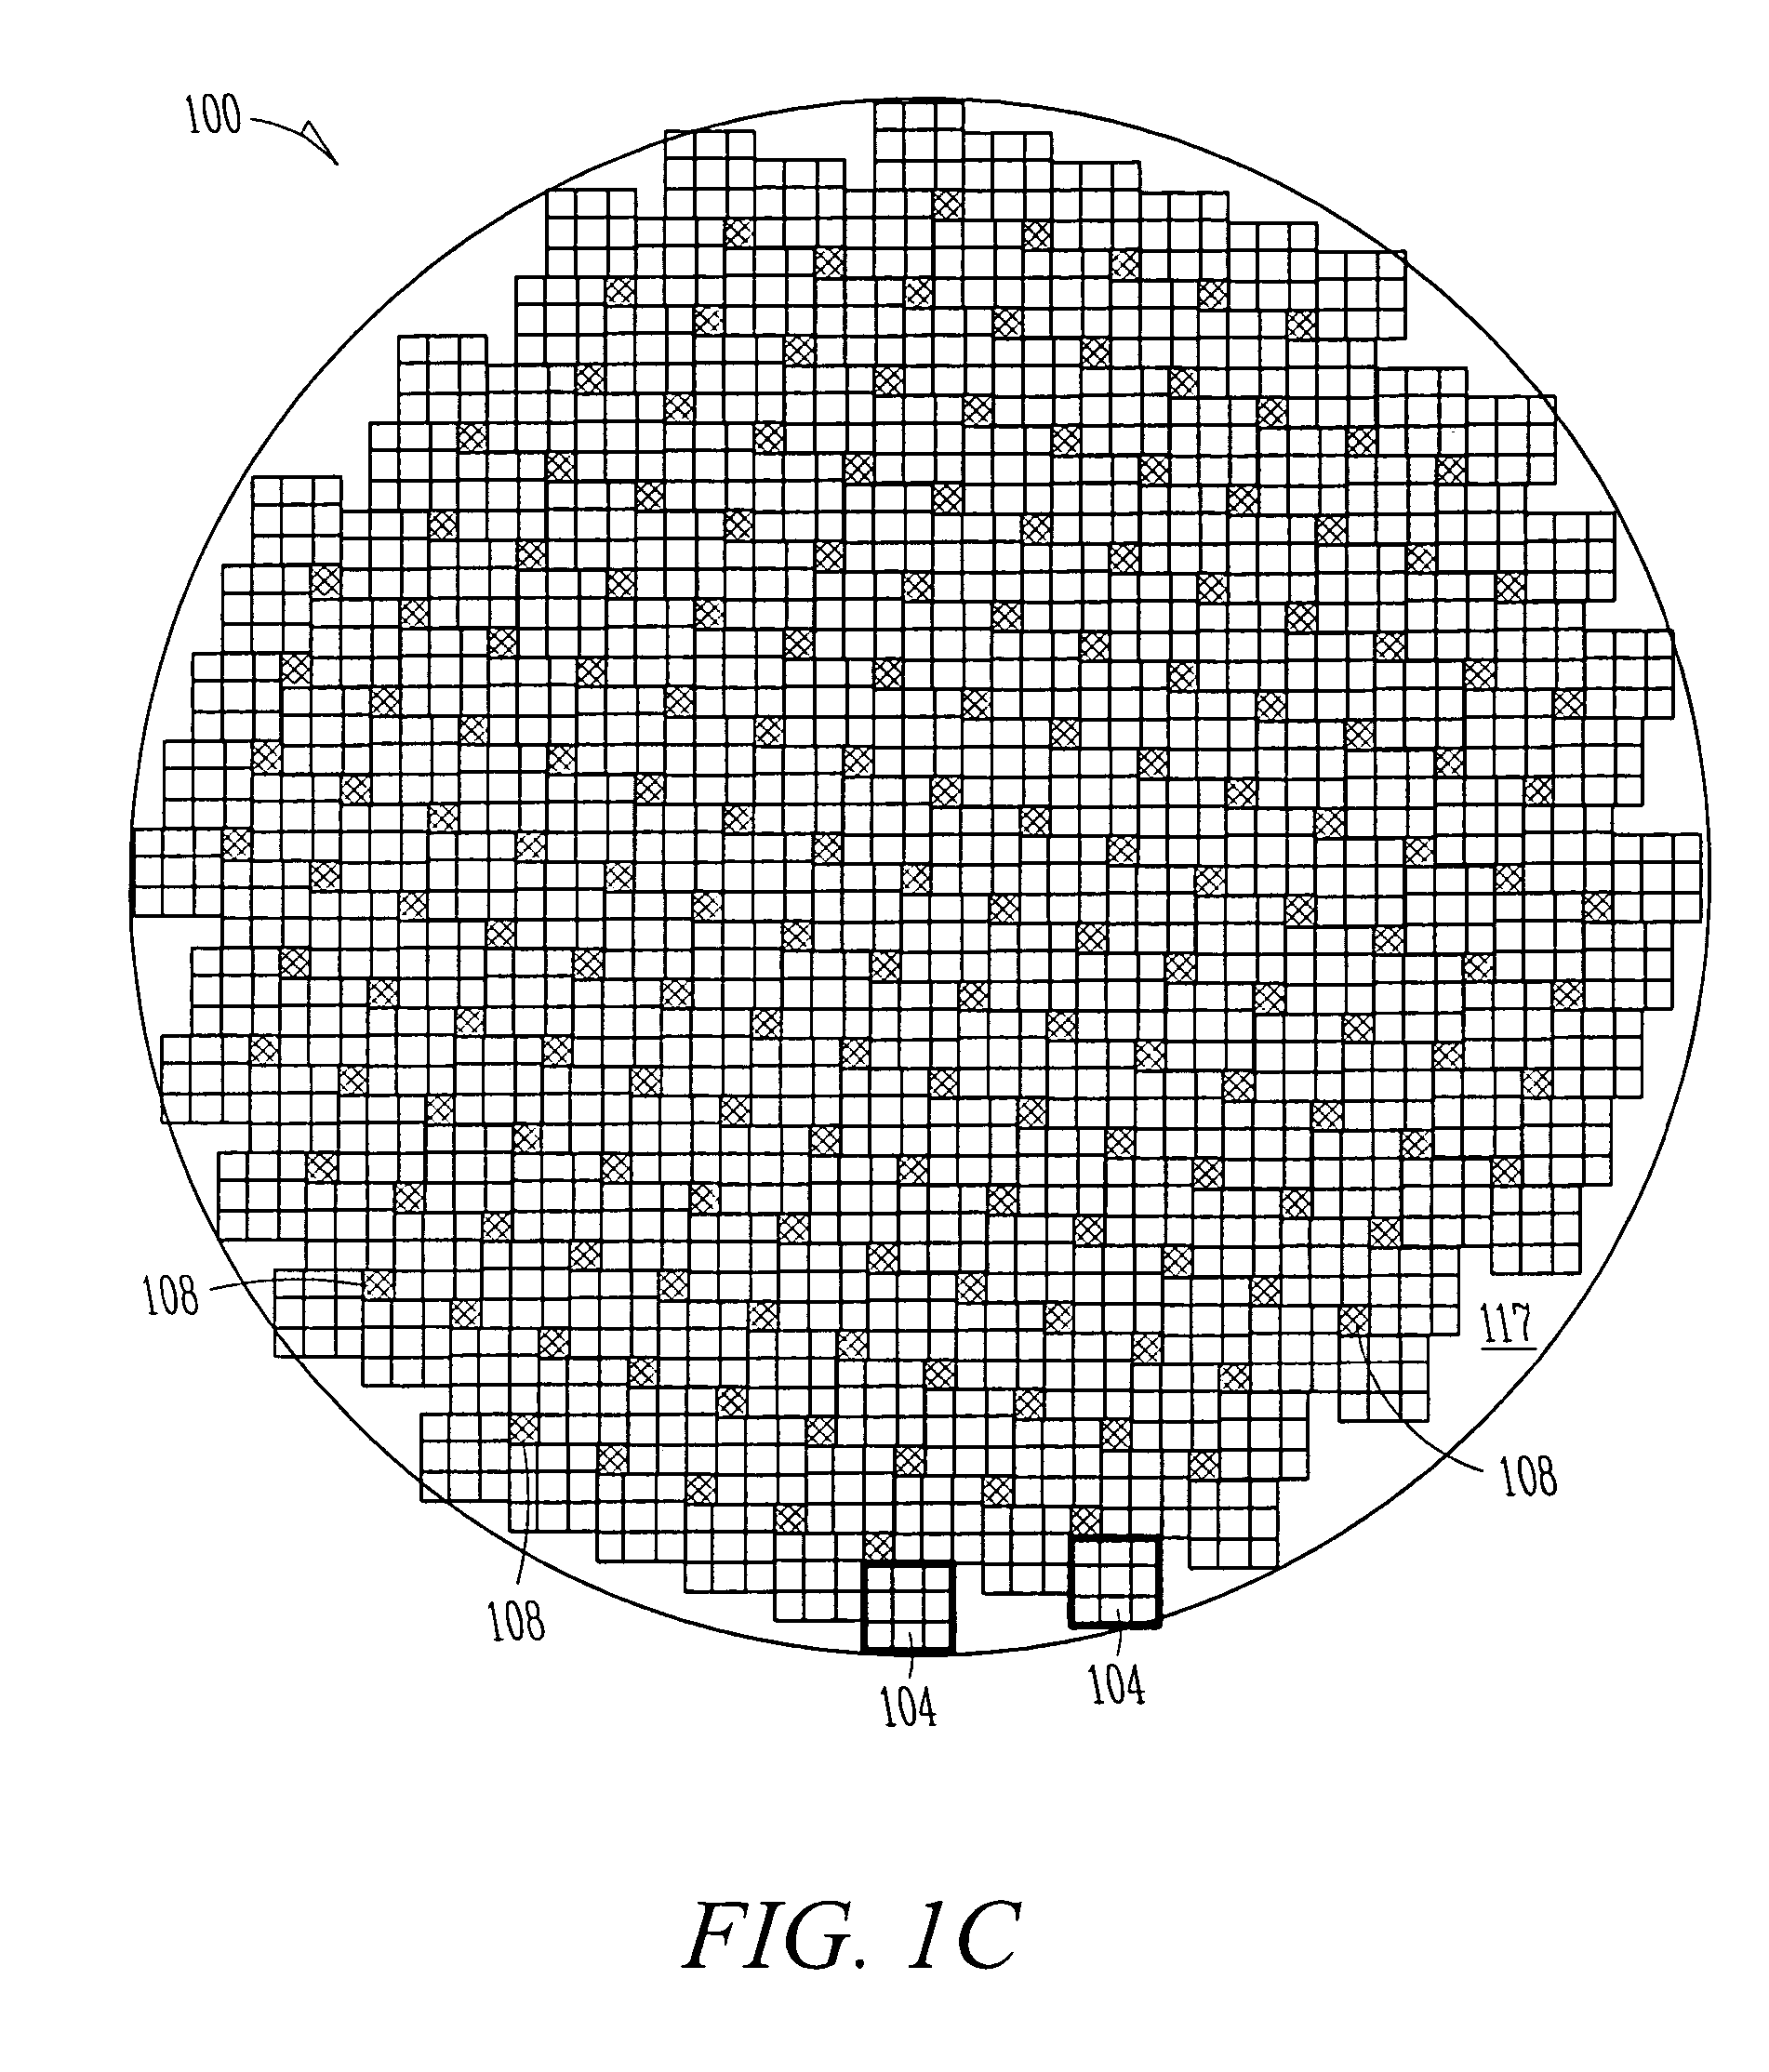 Reflect array antennas having monolithic sub-arrays with improved DC bias current paths